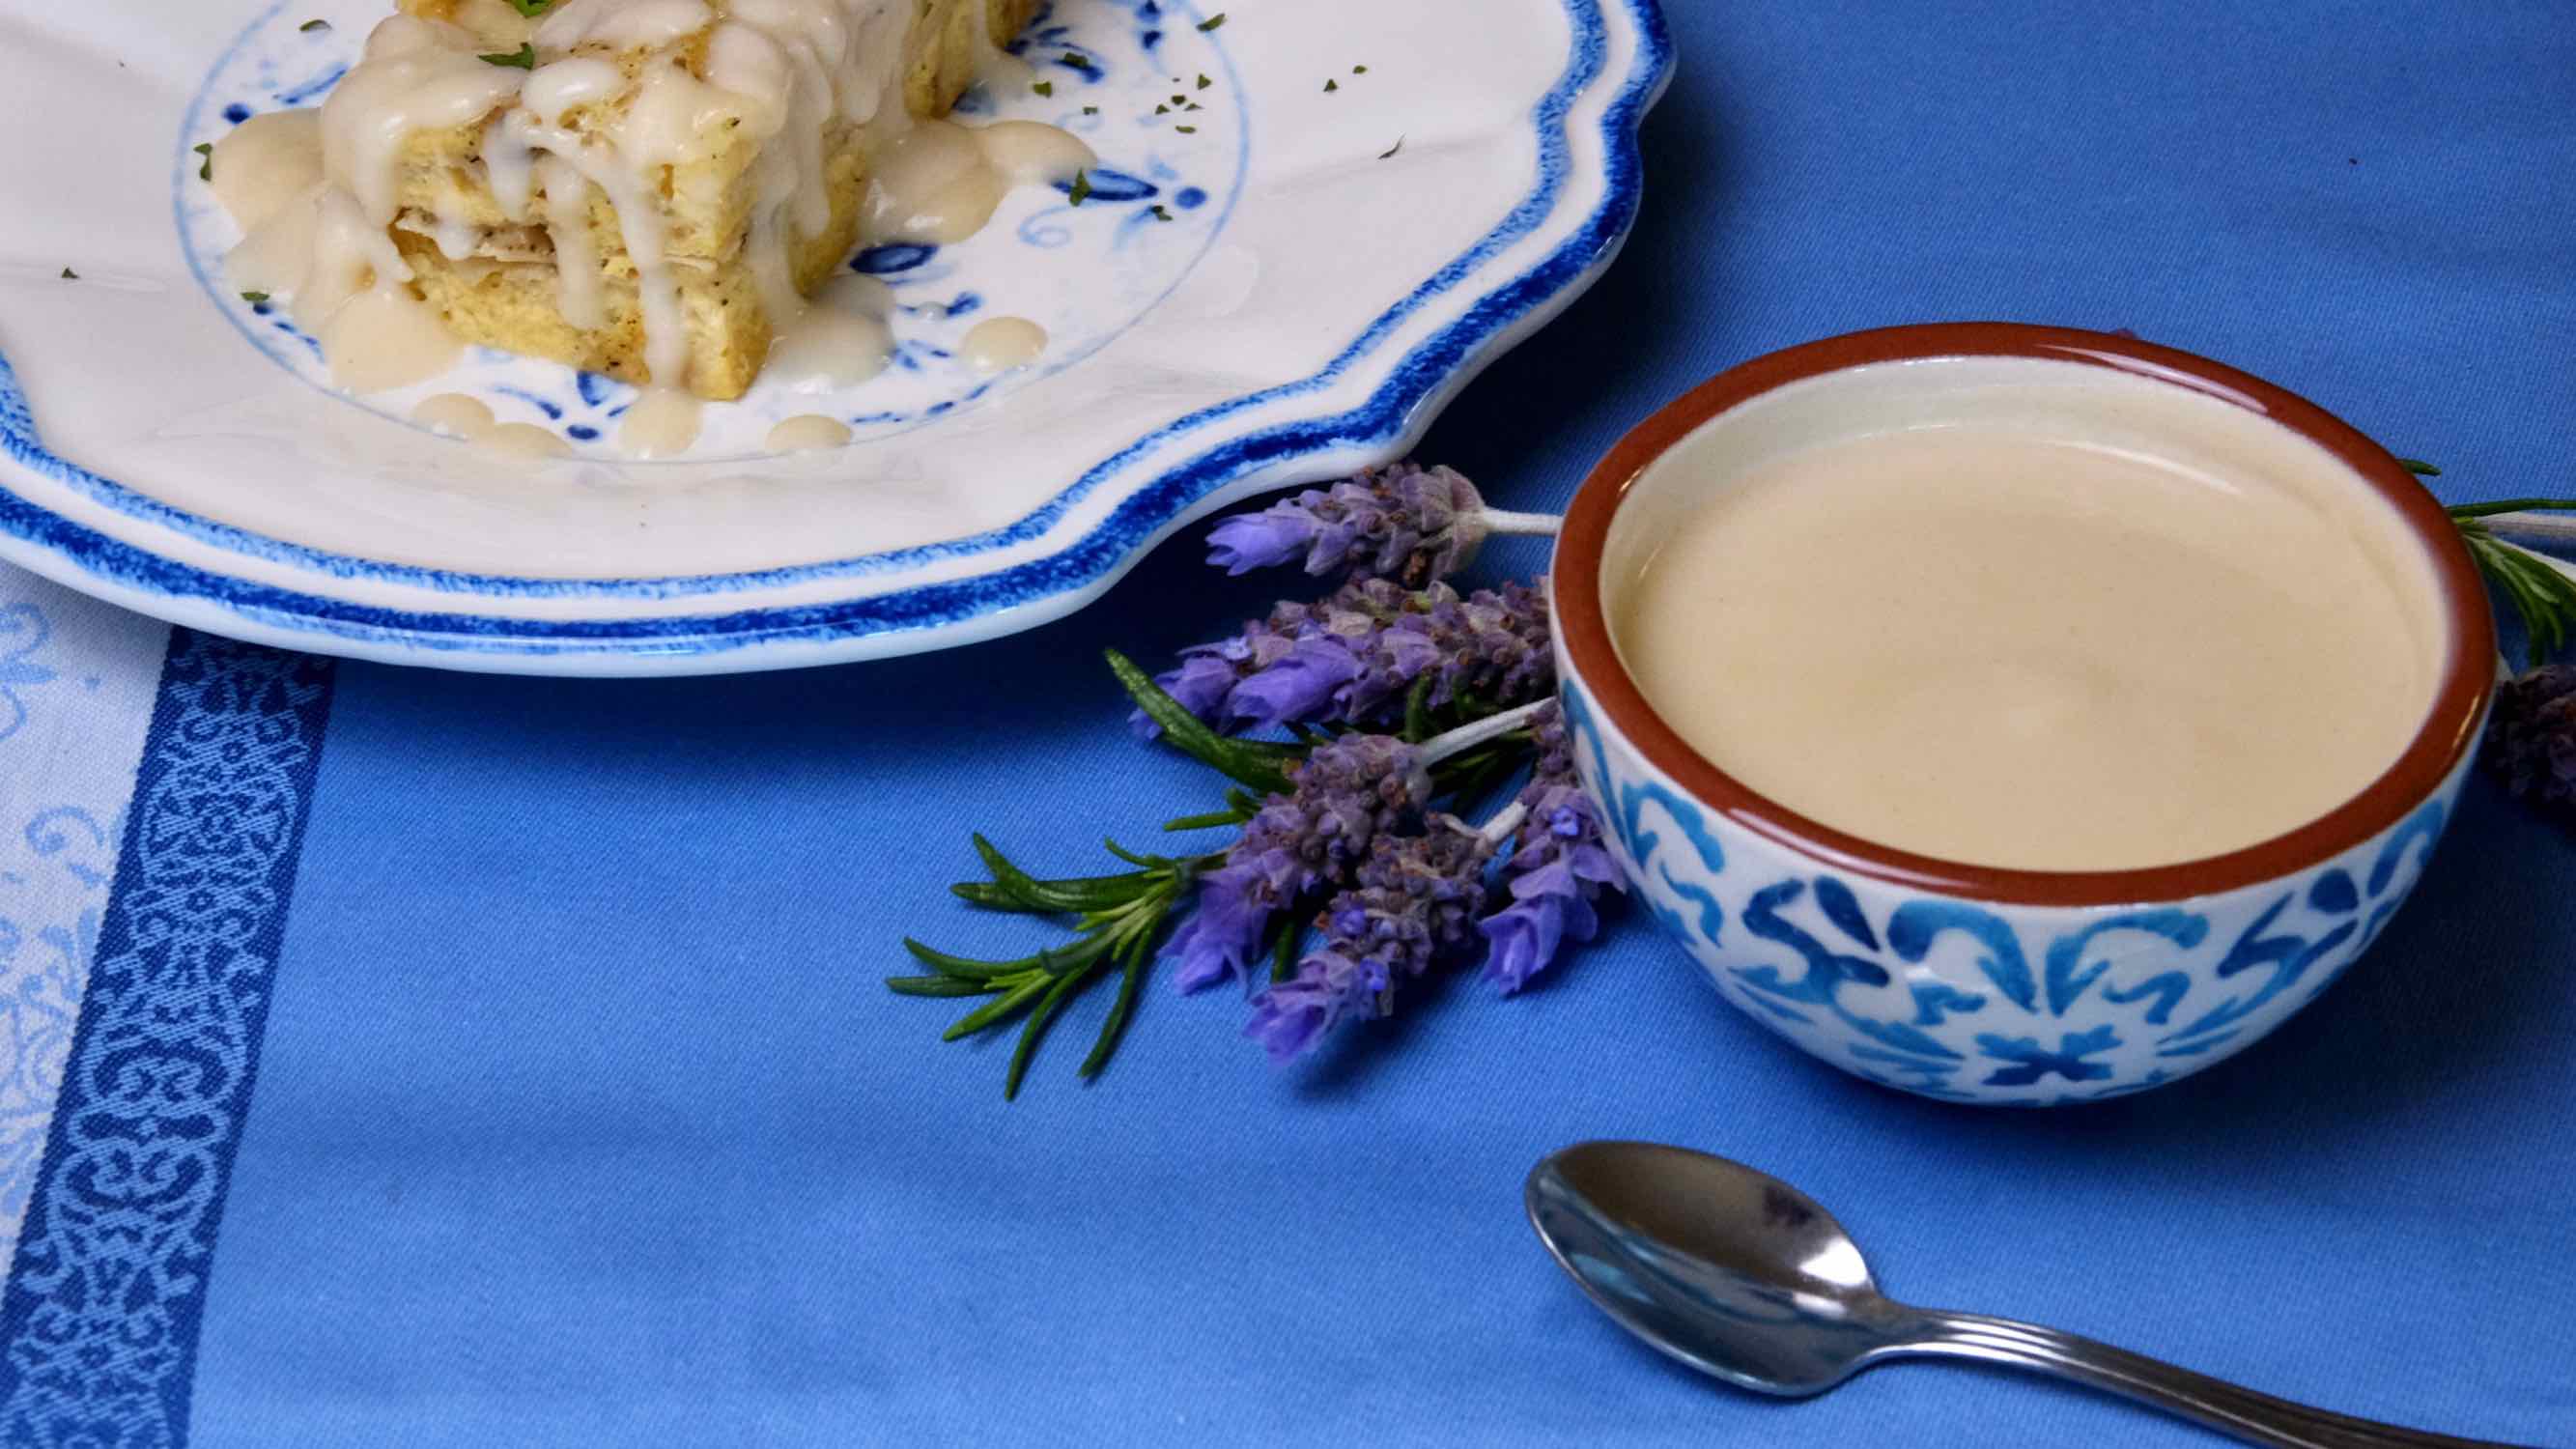 Light Creamy Parmesan Sauce with spoon in forefront. Lavender bouquet and dish with Ham and Gruyere Baked French Toast in background set on a periwinkle linen.